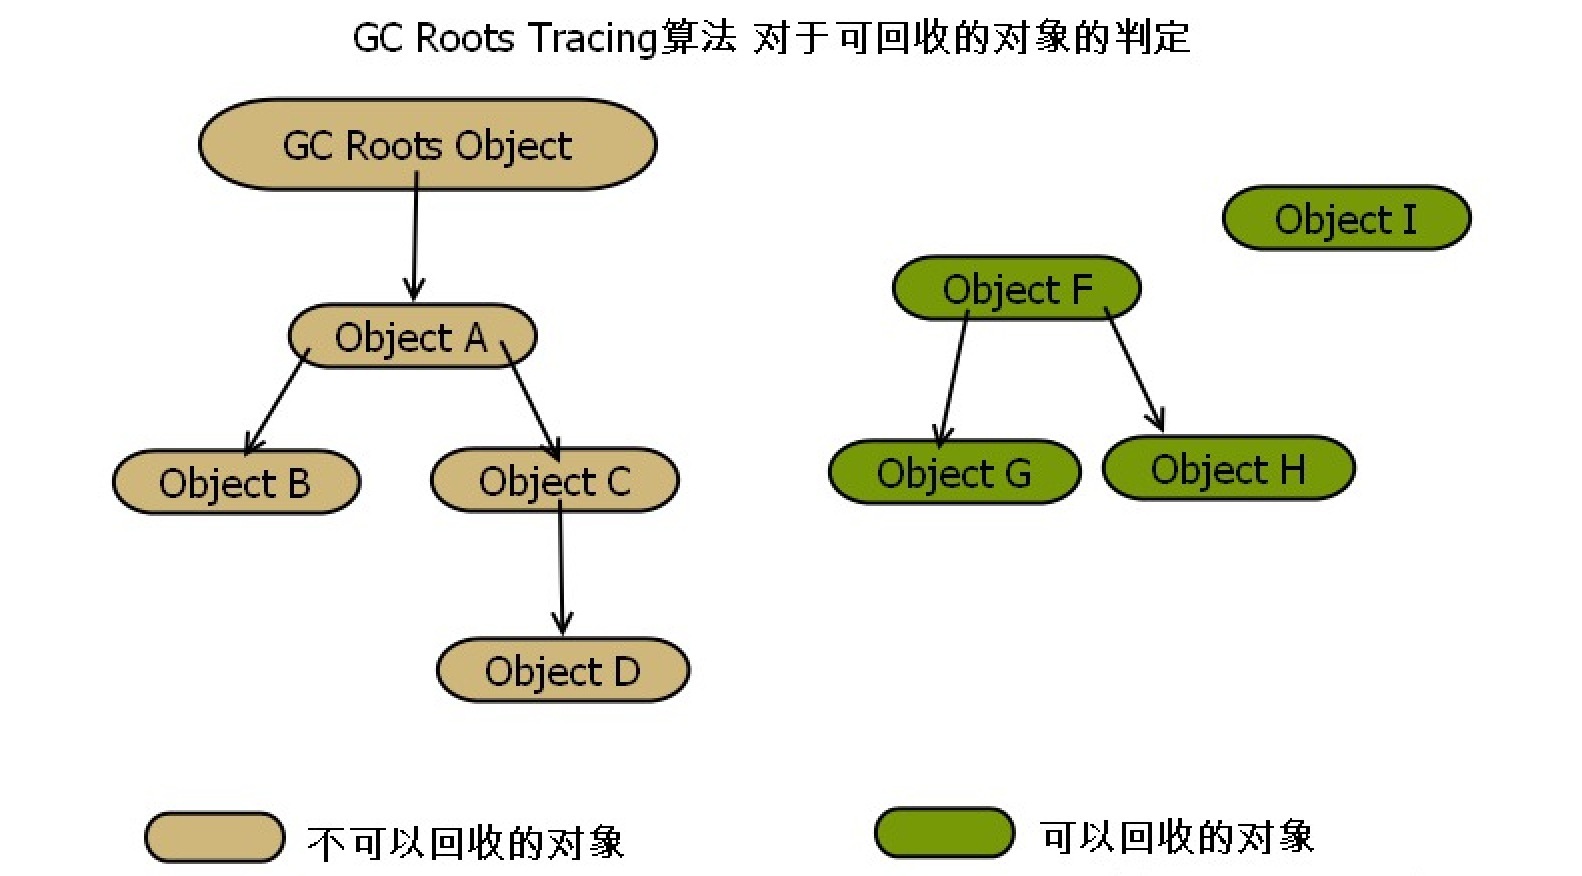 GC roots java. Root source material. Object rooted